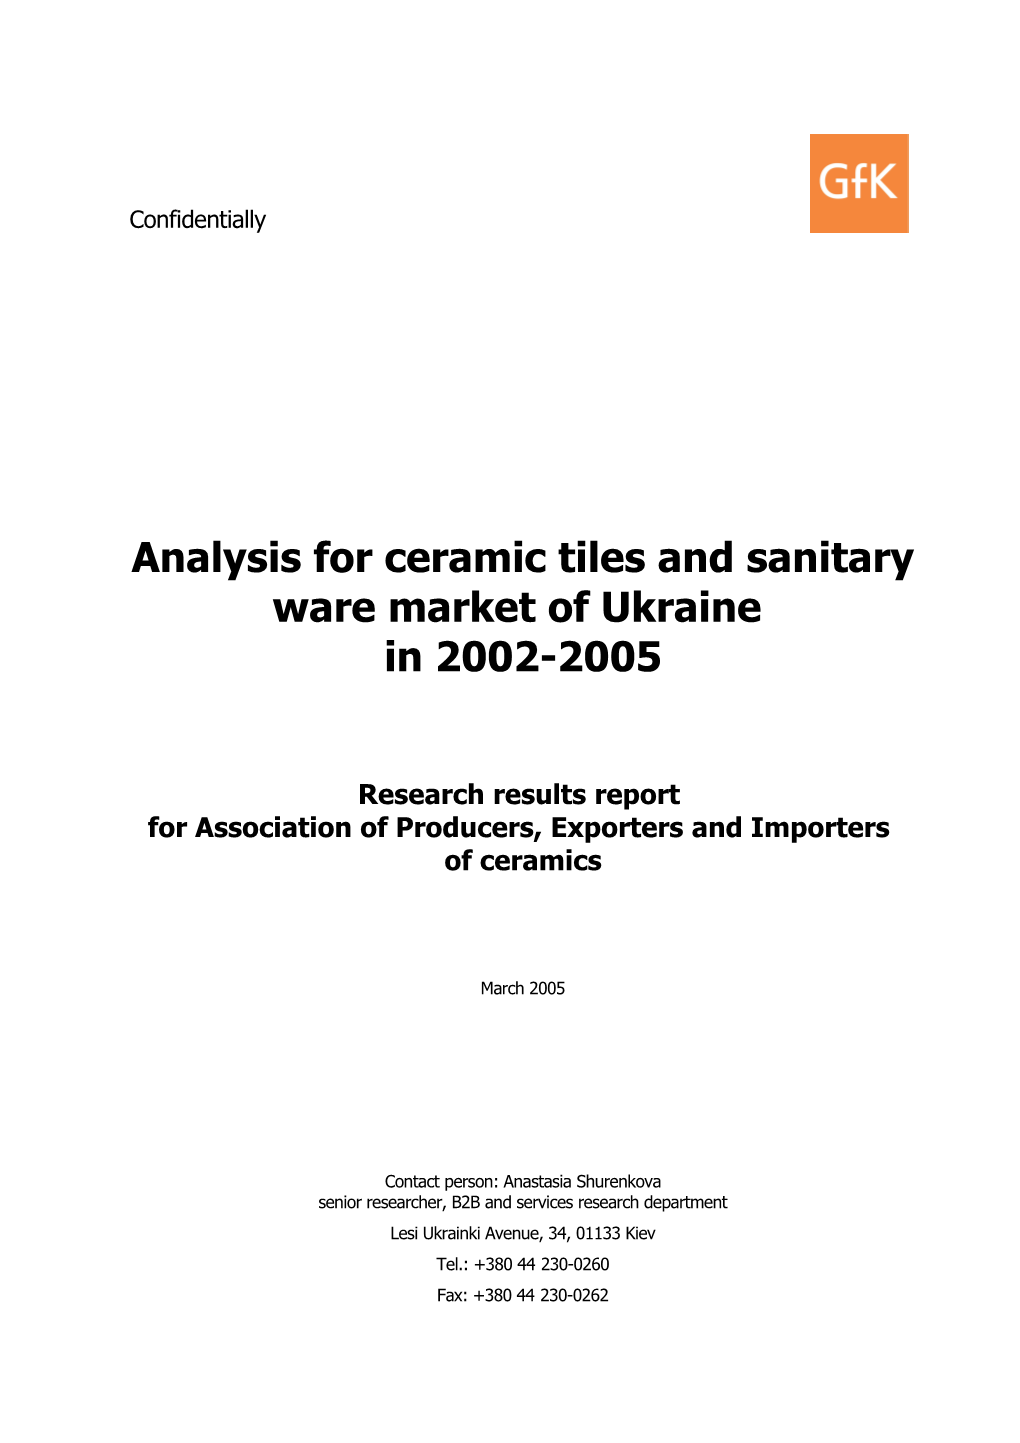 Research Results Report for Association of Producers, Exporters and Importers of Ceramics